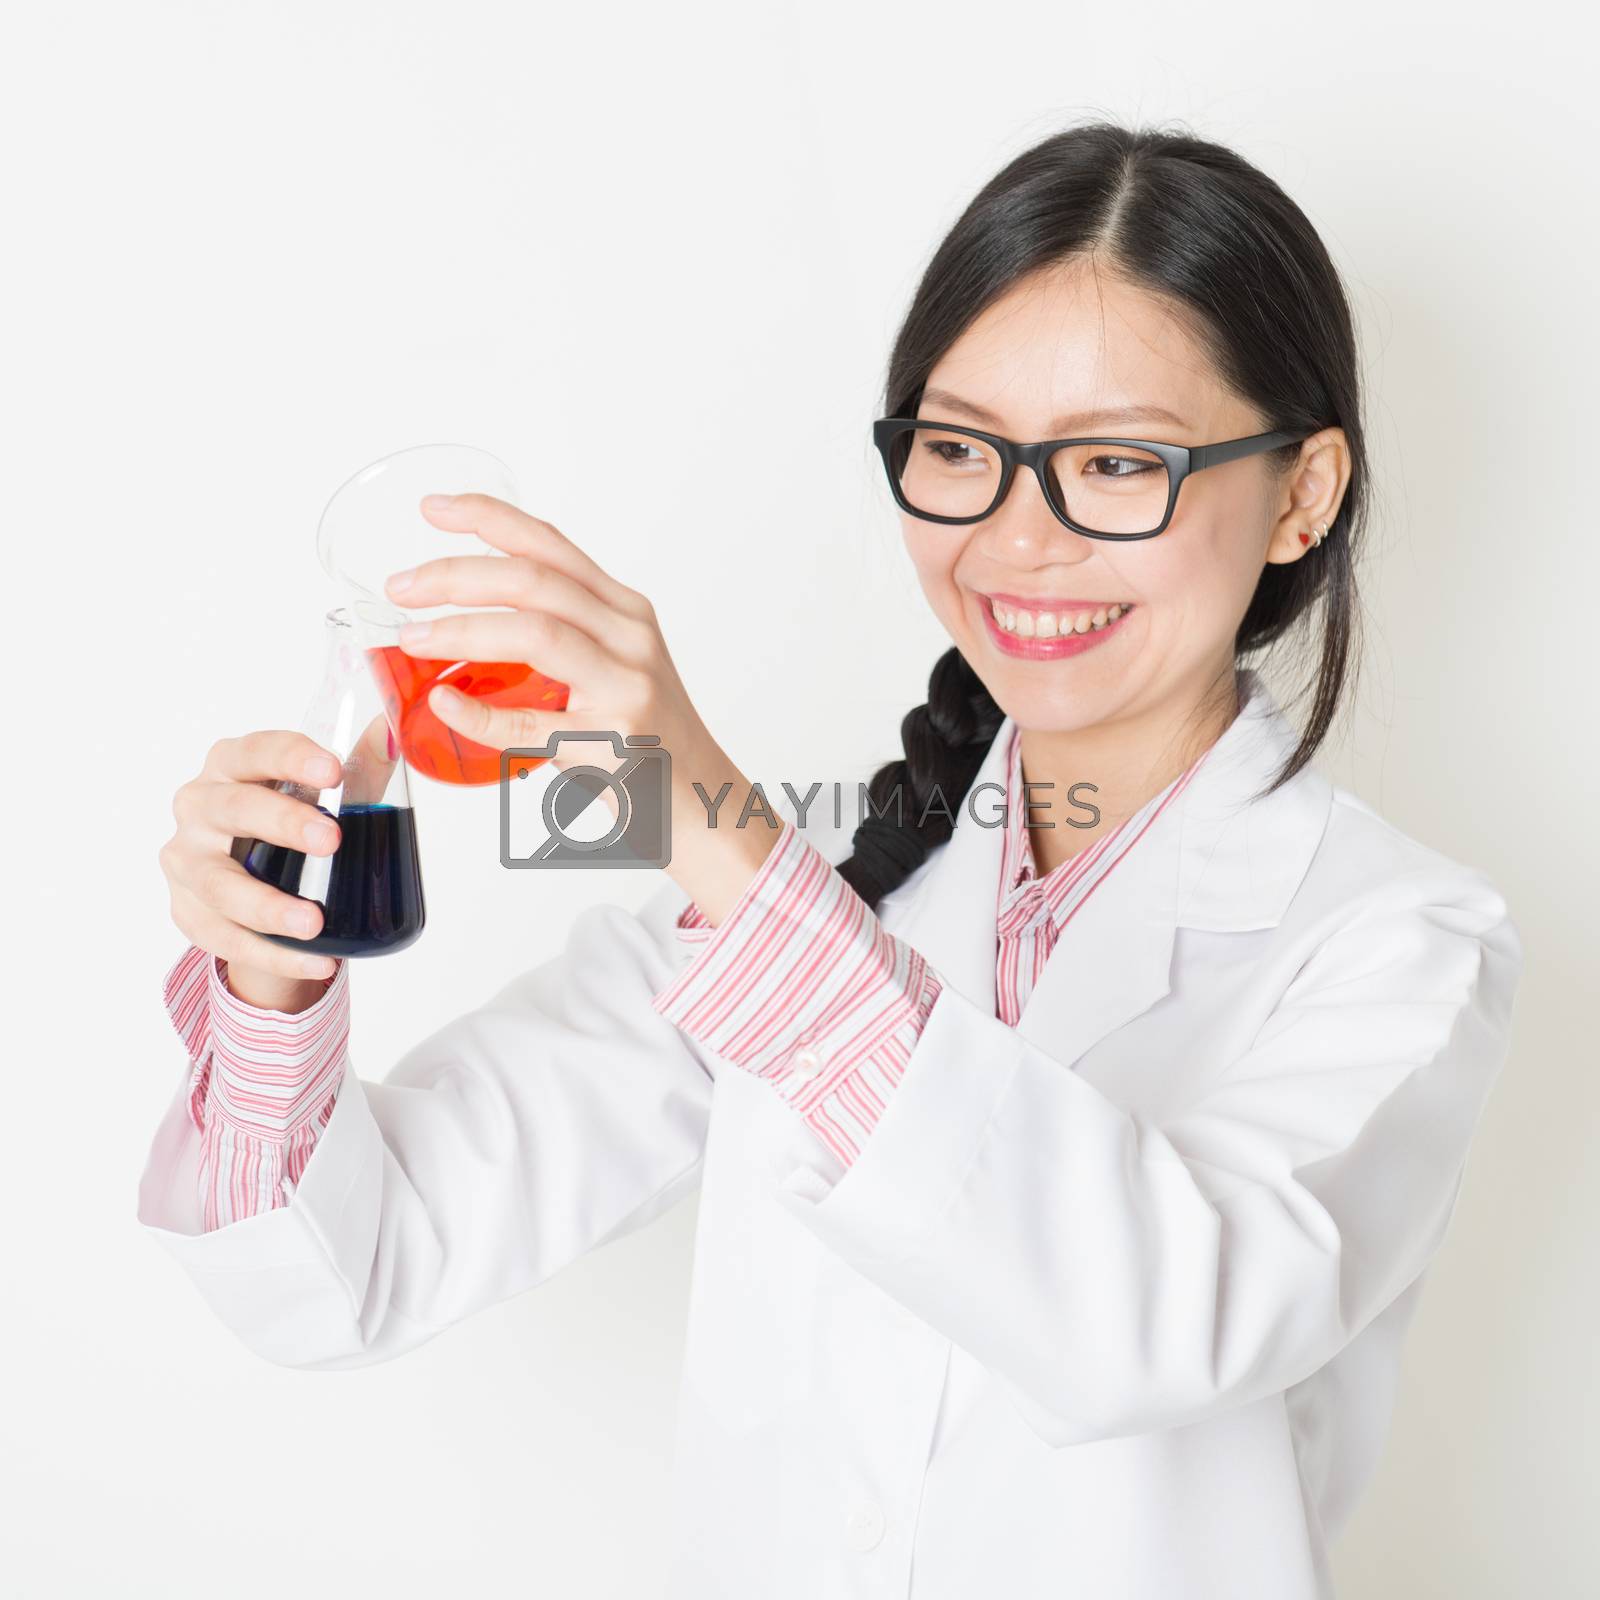 Royalty free image of Lab asisstant carrying out scientific research  by szefei